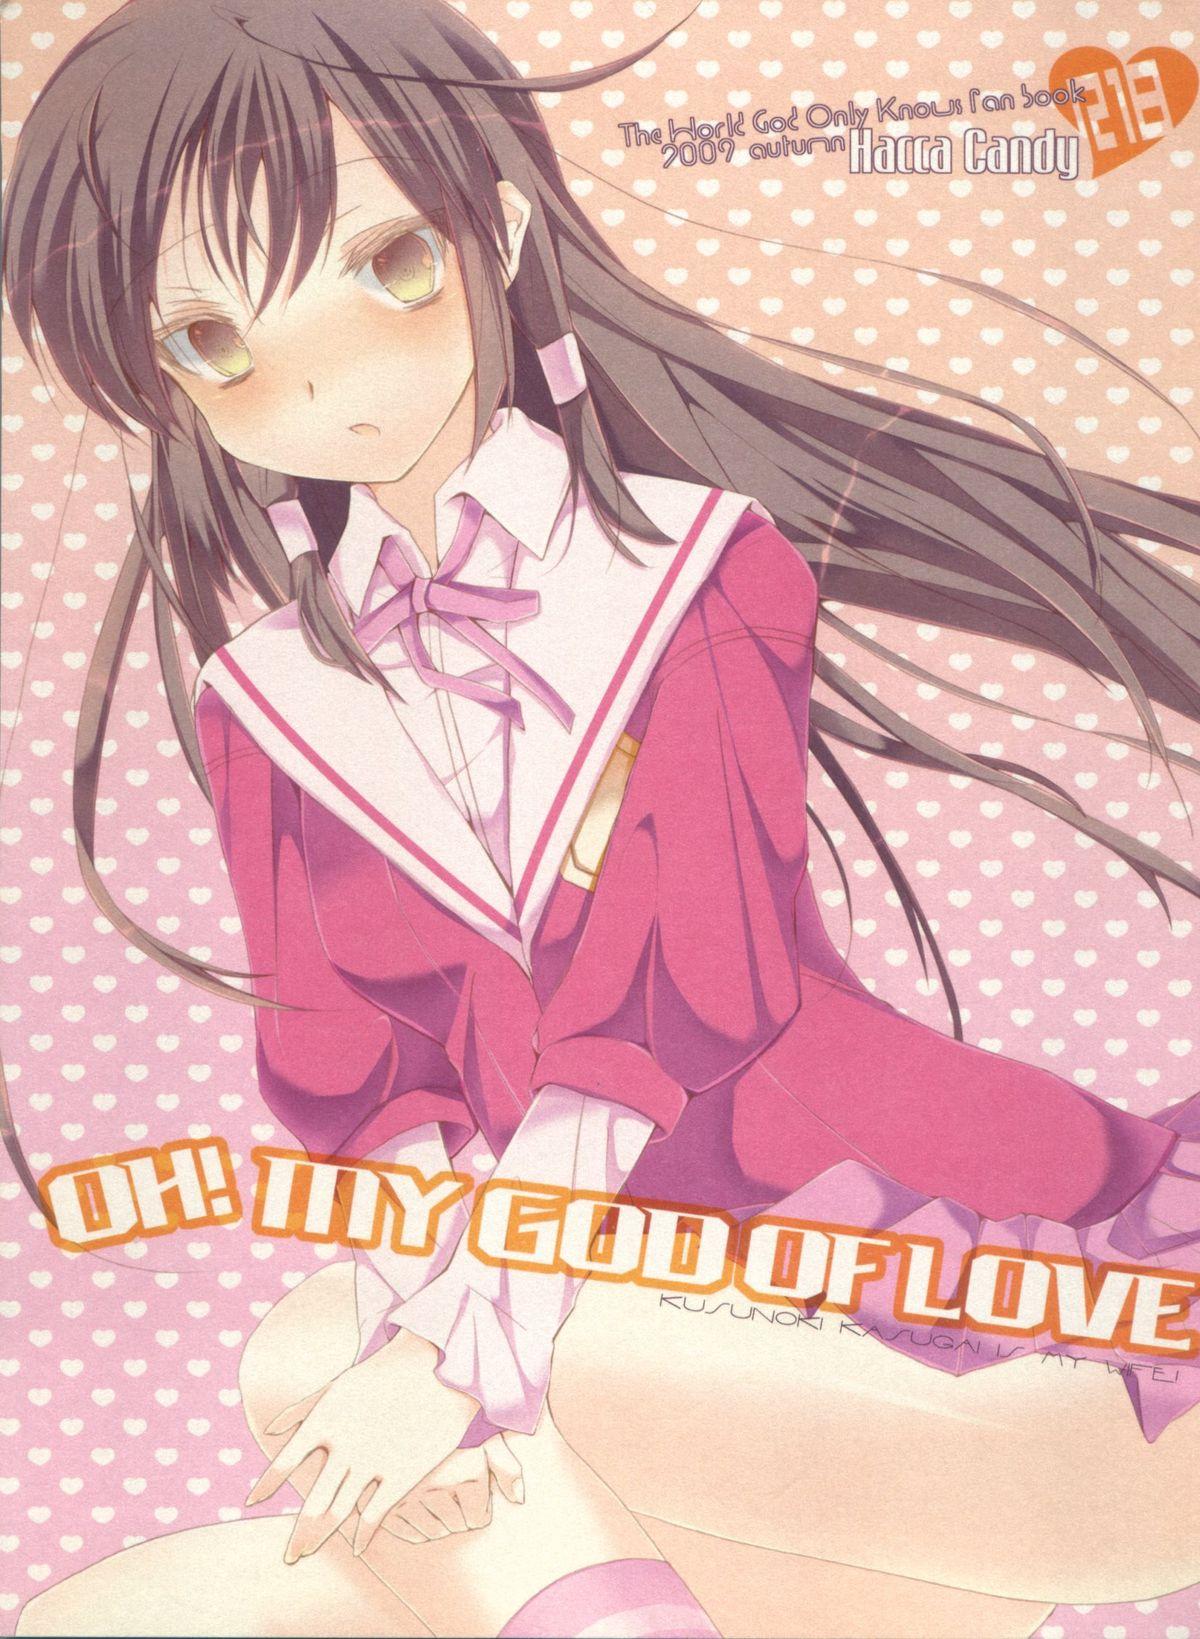 Online OH!MY GOD OF LOVE - The world god only knows Colombia - Picture 1